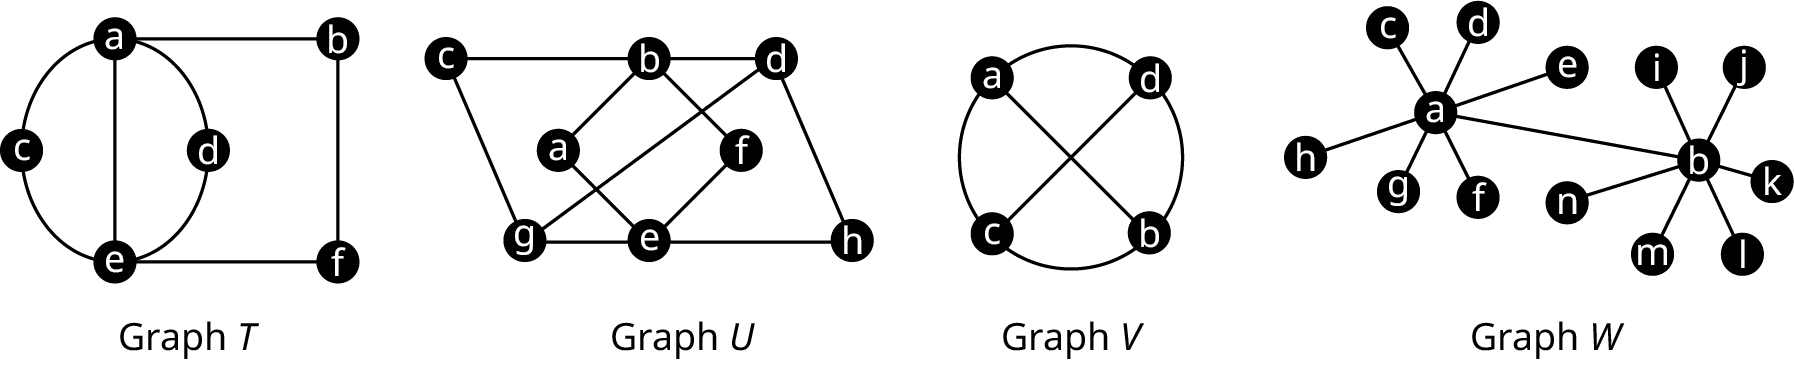 Four graphs. Graph T has six vertices: a, b, c, d, e, and f. The edges connect a c, c e, e d, d a, a e, e b, b f, and f e. Graph U has eight vertices labeled a to h. The edges connect c b, b d, d h, h e, e g, g c, b a, a e, e f, f b, and g d. Graph V has four vertices, a to d. The edges connect a c, c b, b d, d a, a b, and d c. Graph W has 14 vertices labeled a to n. The edges from a lead to b, c, d, e, f, g, and h. The edges from b lead to i, j, k, l, m, and n.